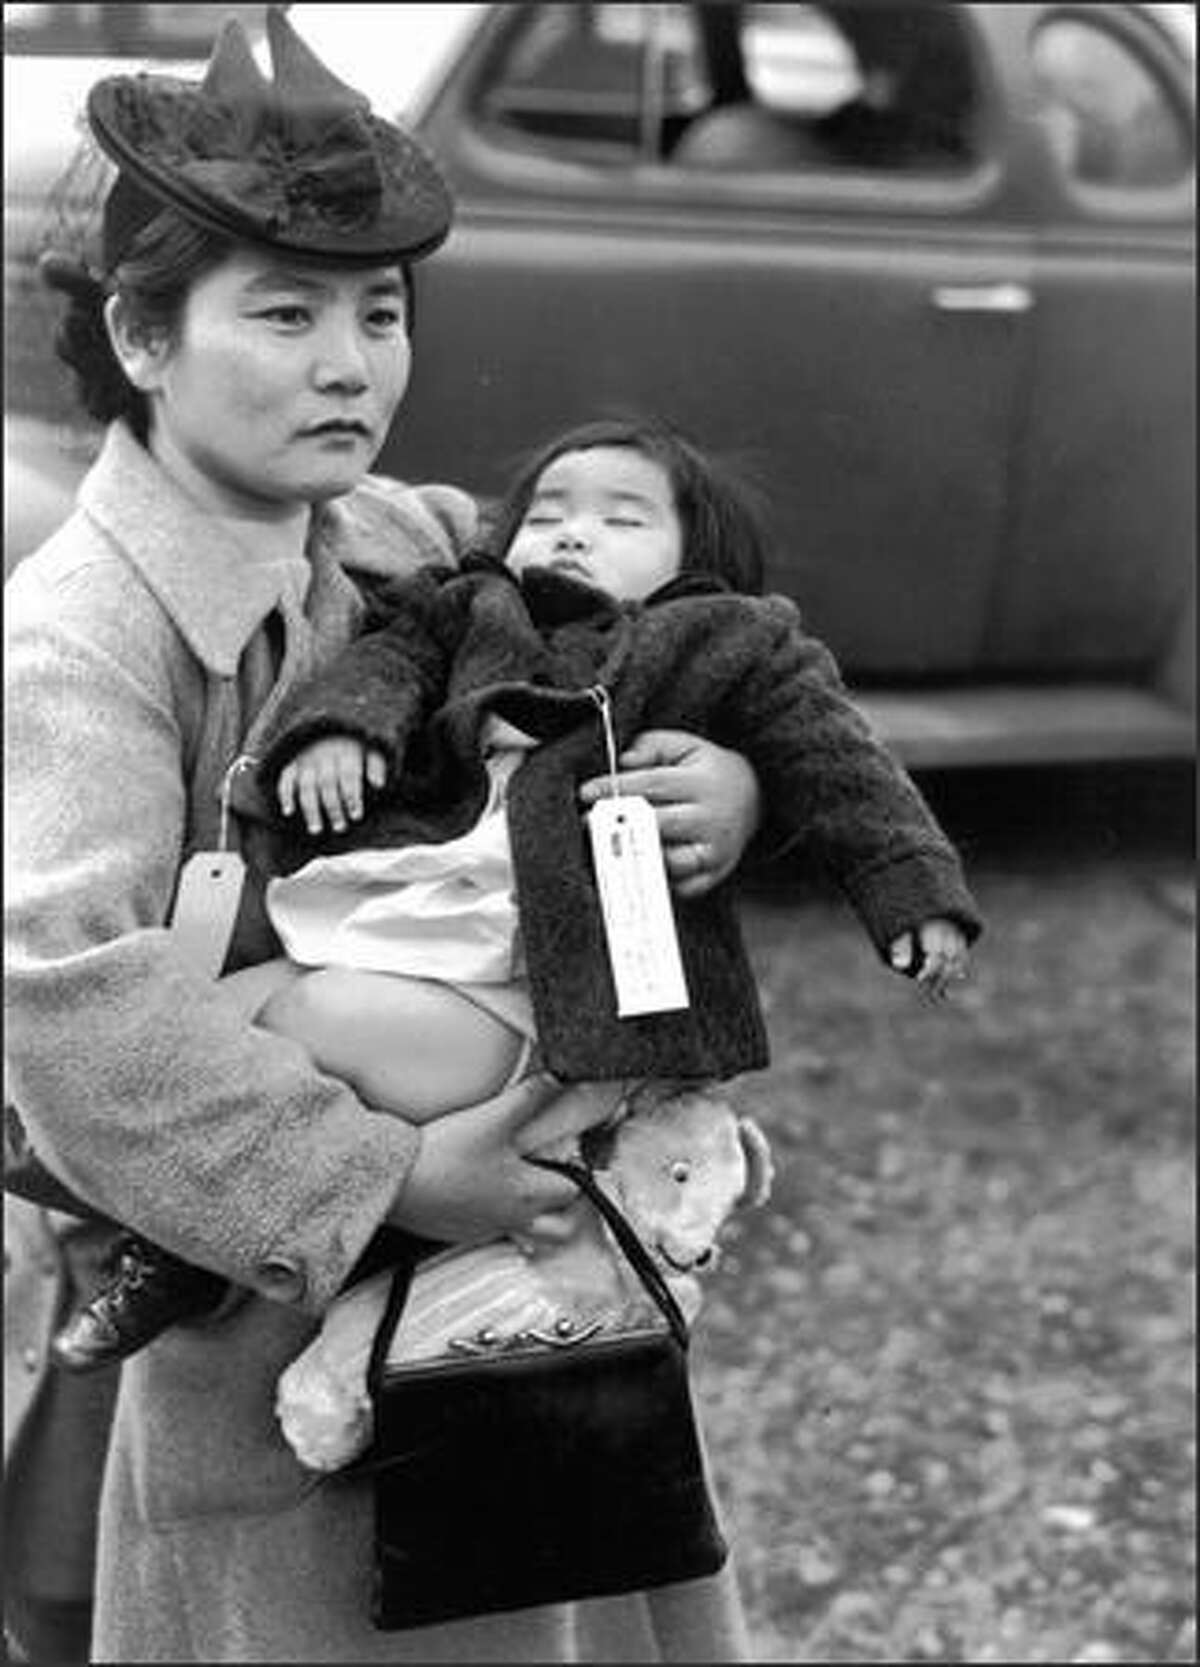 Her 11-month-old daughter asleep in her arms, Fumiko Hayashida waits to board a ferry from Bainbridge Island on March 30, 1942. The pair were being deported to an internment camp for Japanese-Americans in Manzanar, Calif.